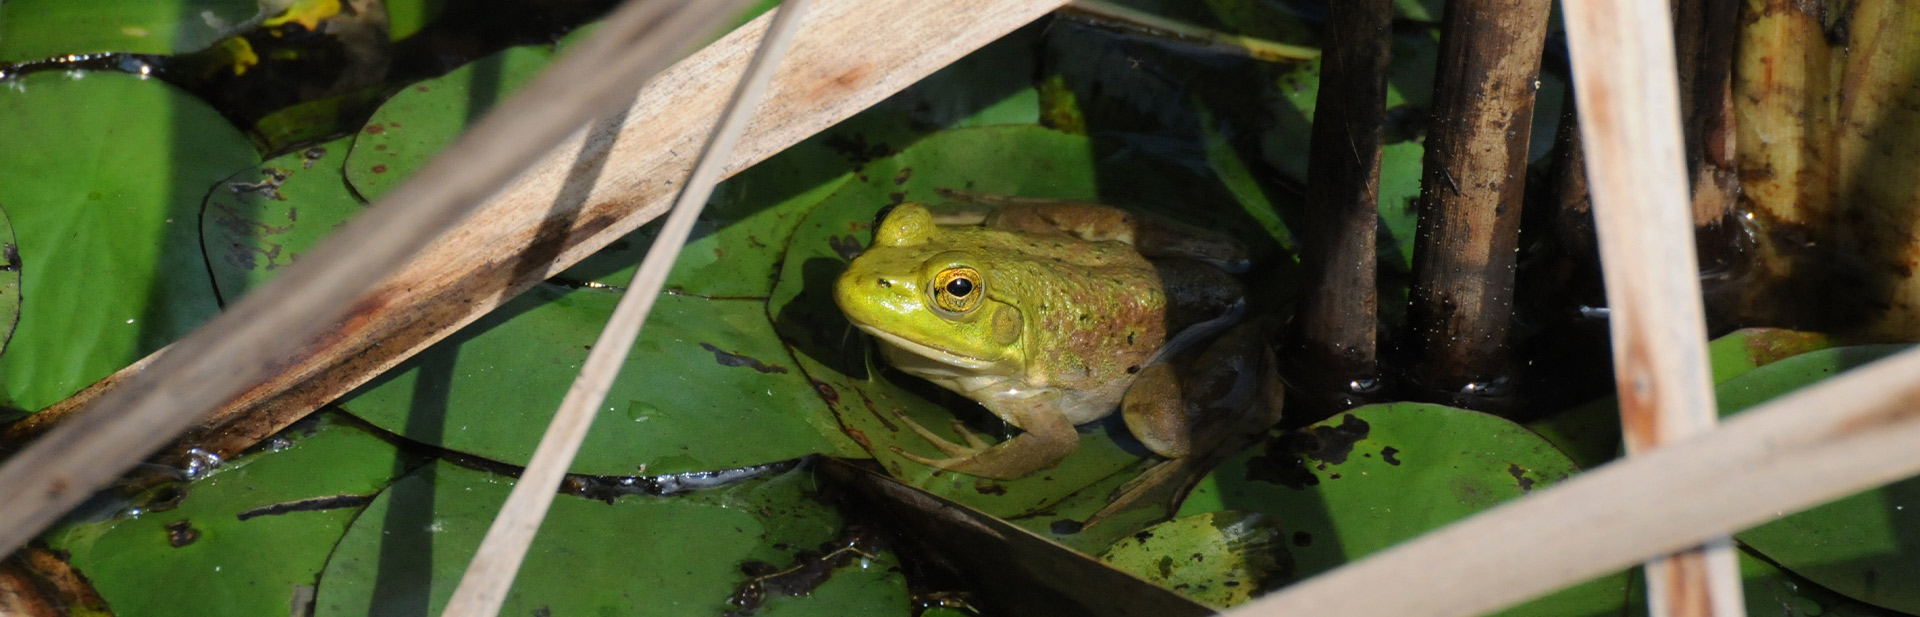 Bull frog on lillypads